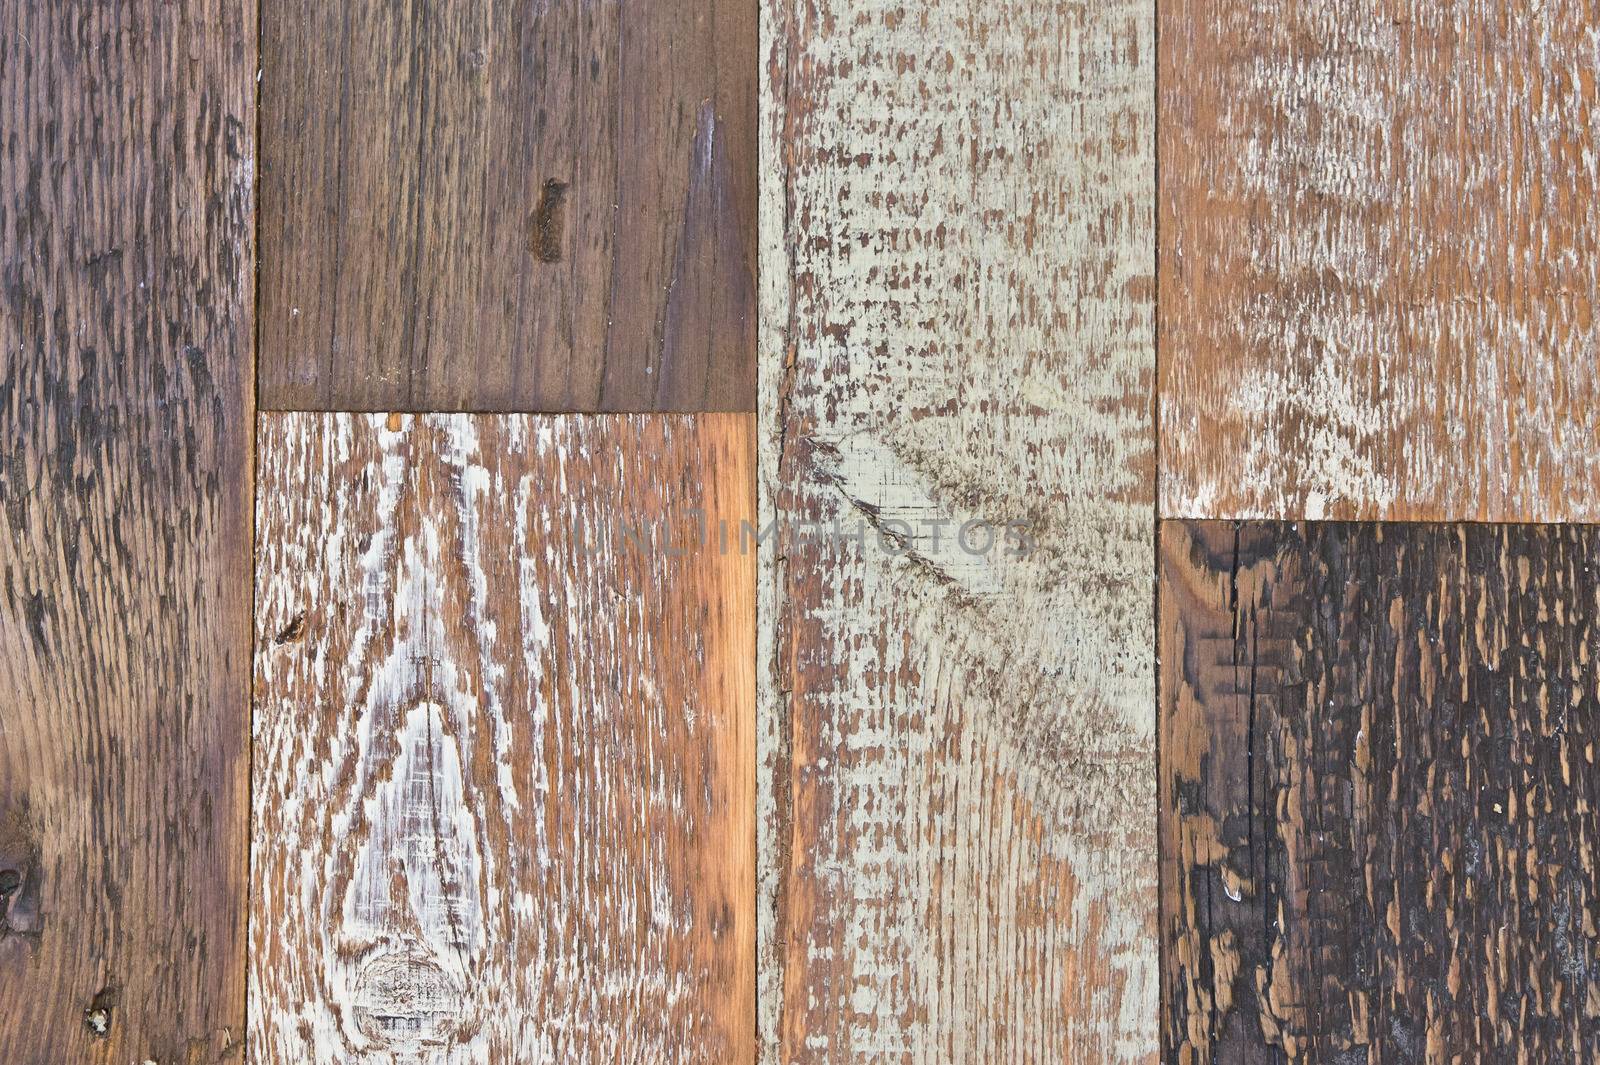 Weathered wood as a background image